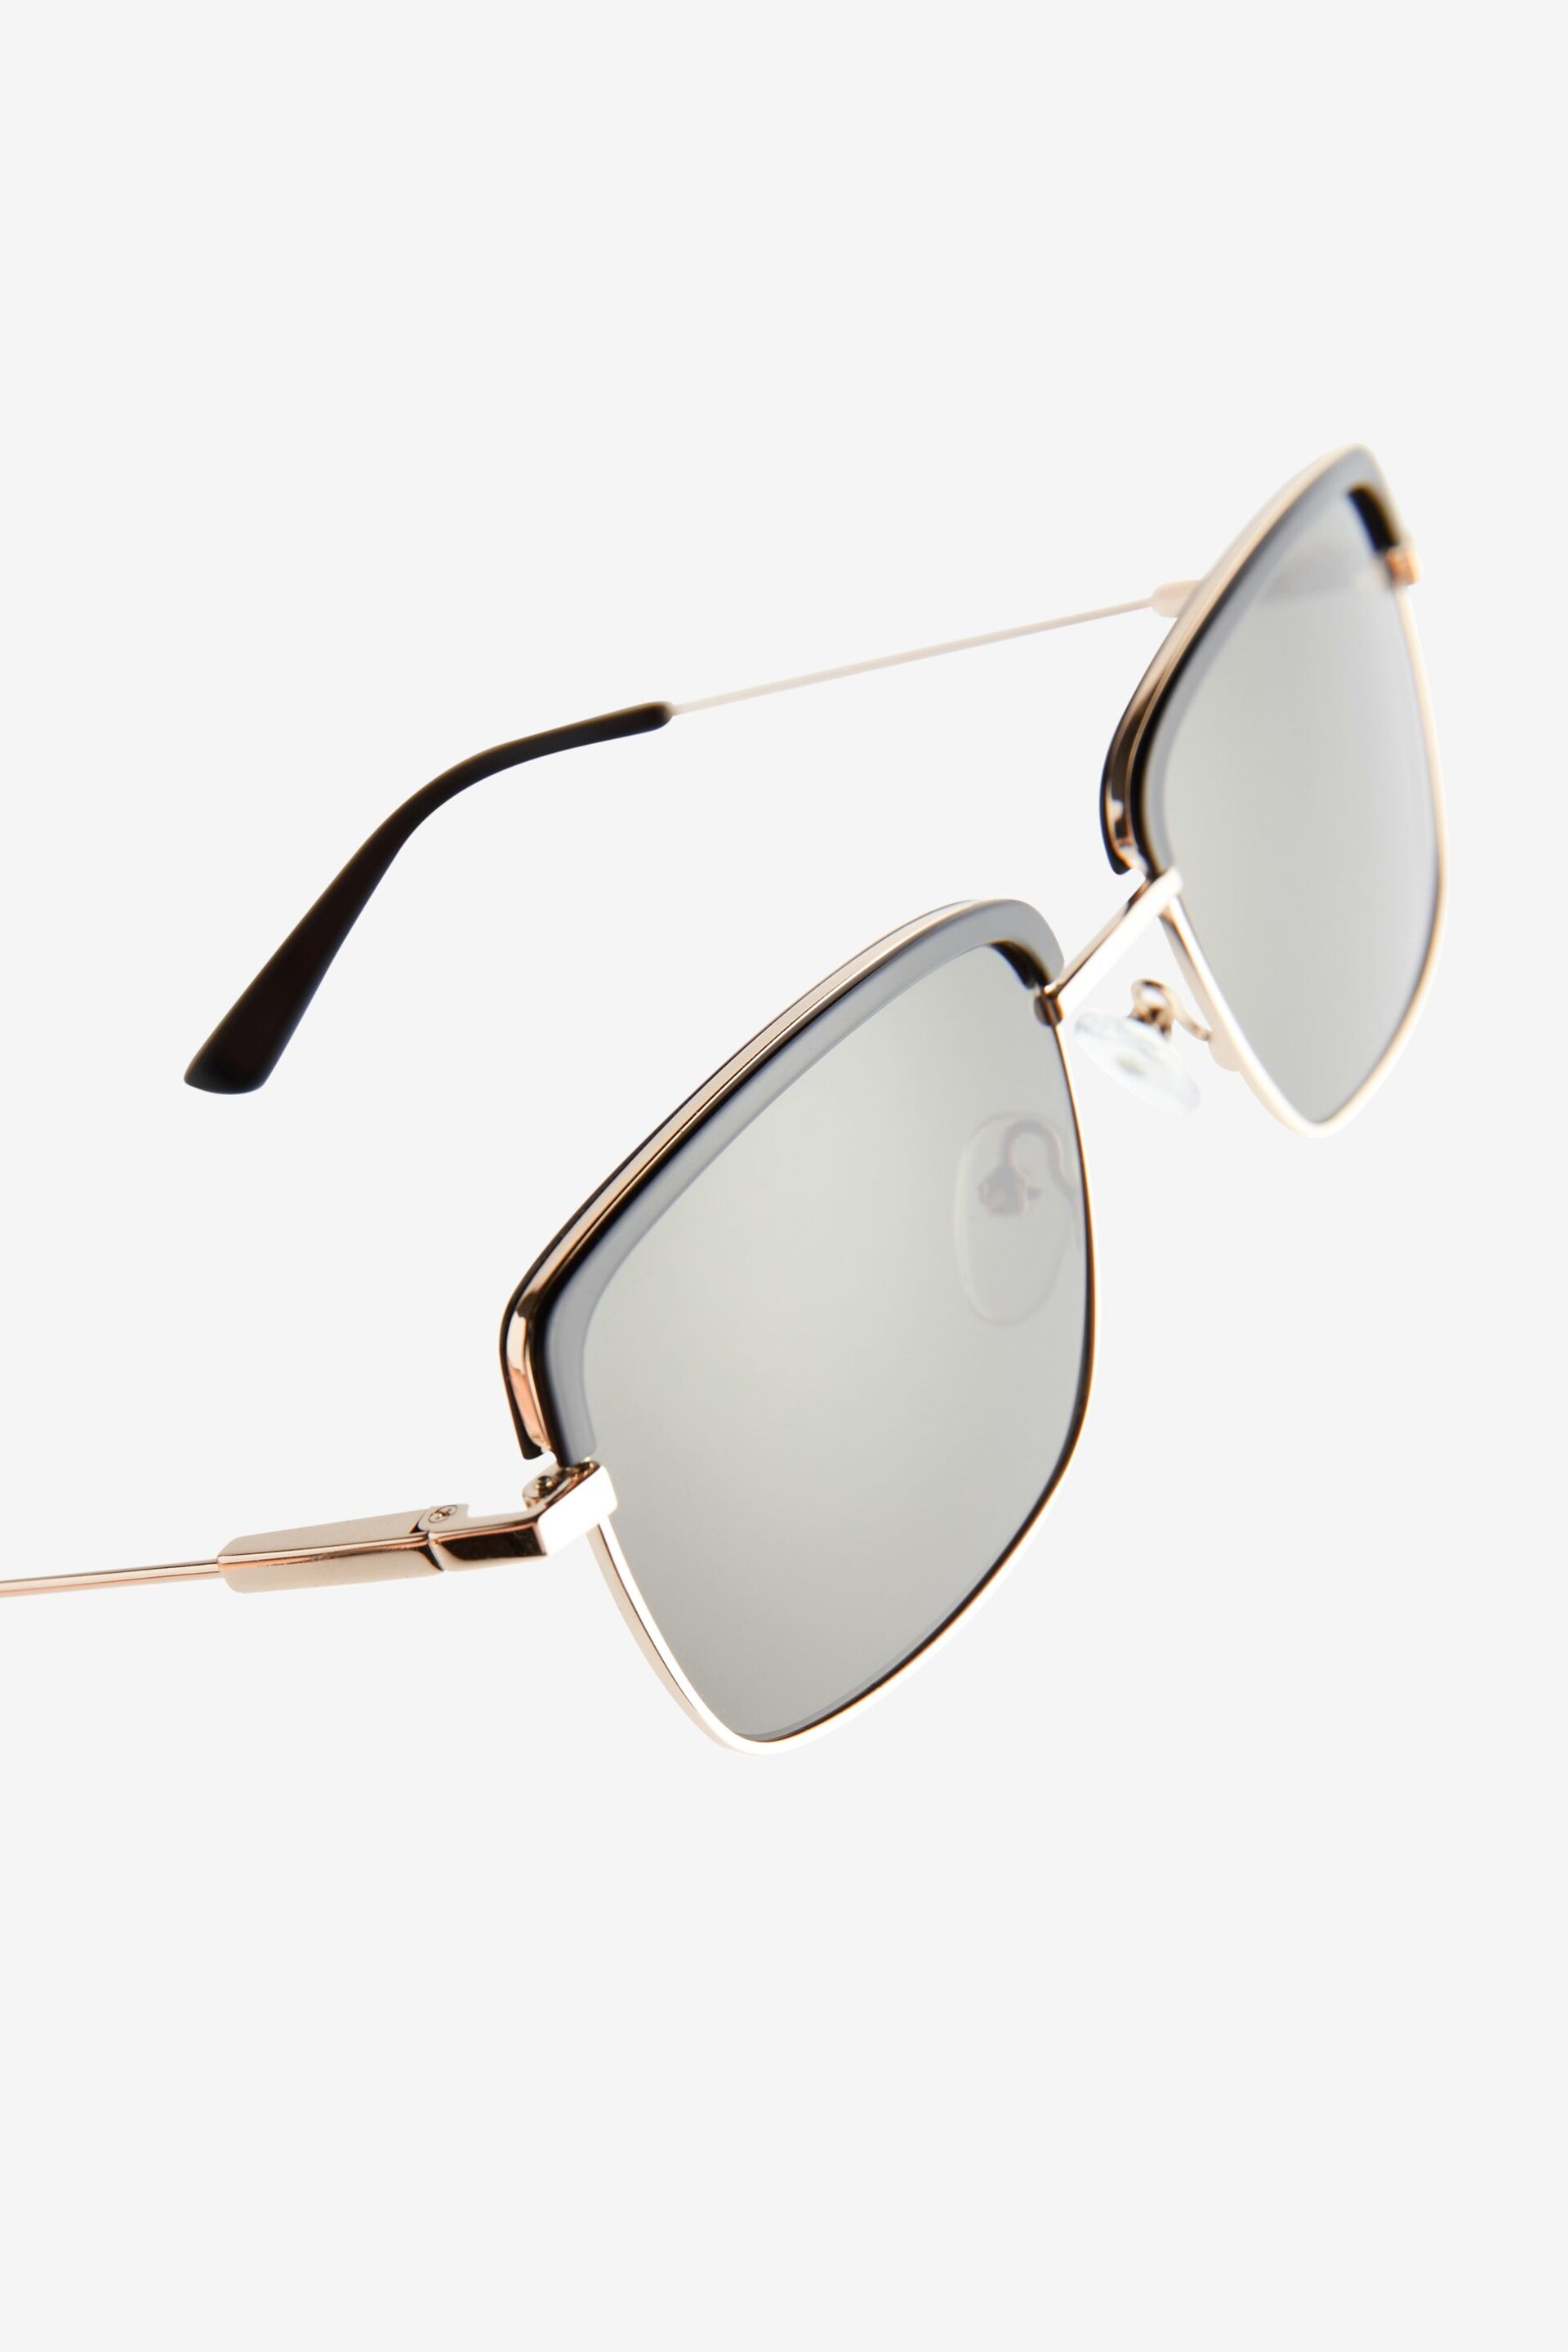 Black and Gold Clubmaster Polarised Sunglasses - Image 4 of 4